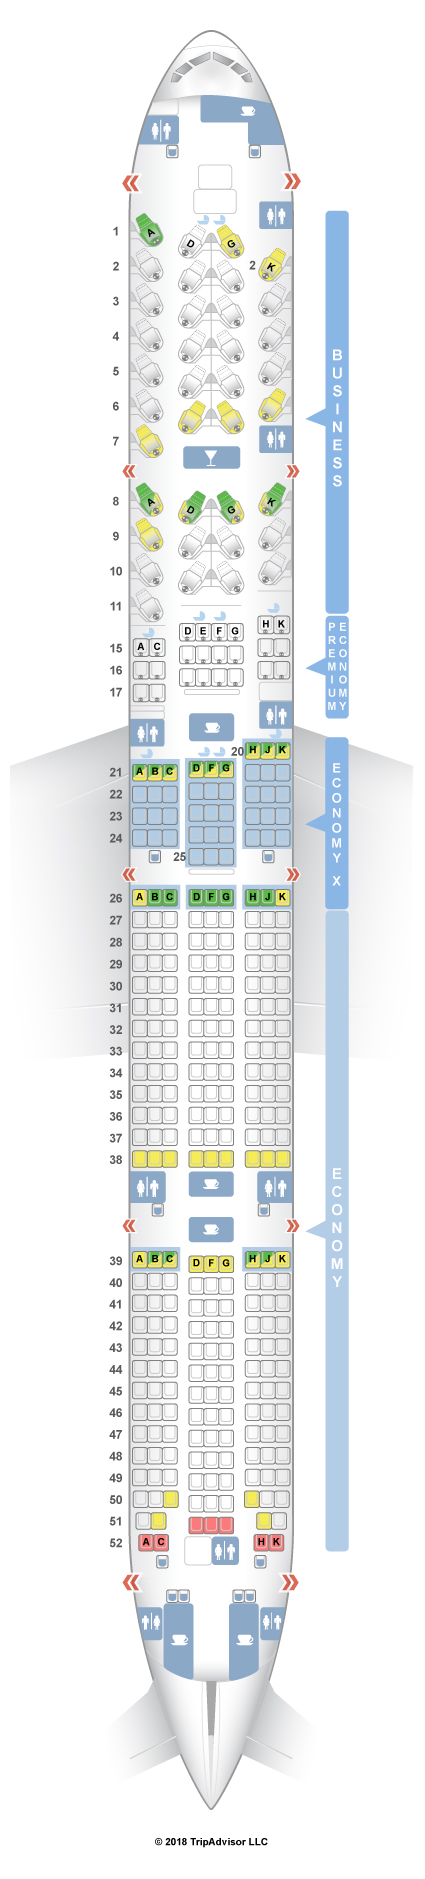 Seat map Boeing 777-300 Emirates. Best seats in the plane